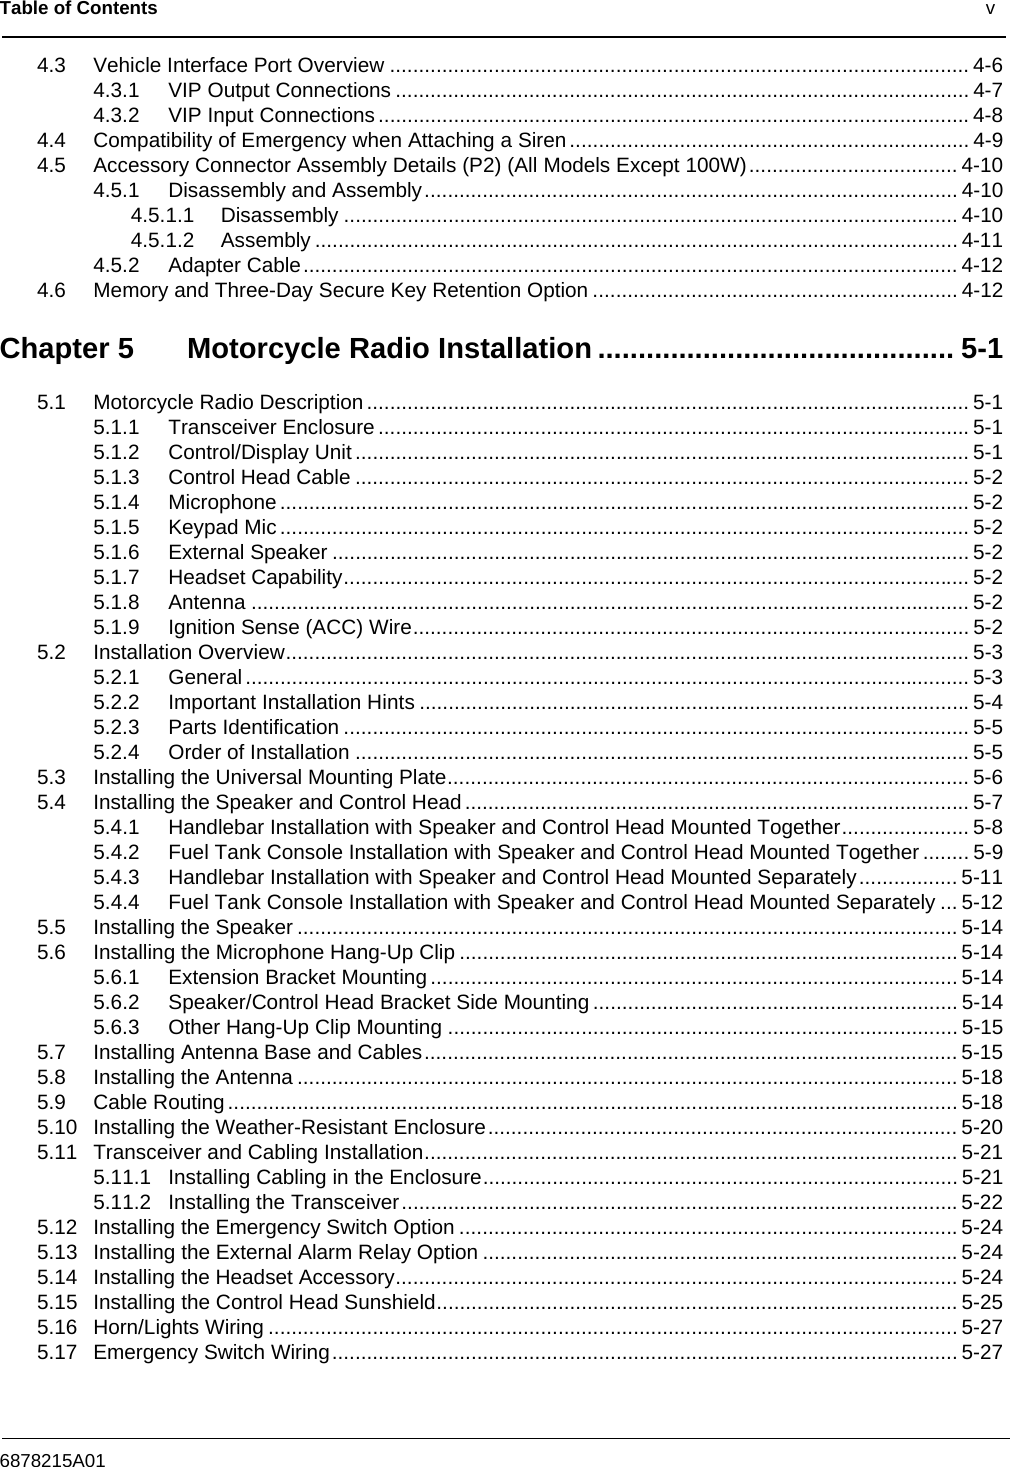 Table of Contents                                                                                              v6878215A014.3 Vehicle Interface Port Overview .................................................................................................... 4-64.3.1 VIP Output Connections ................................................................................................... 4-74.3.2 VIP Input Connections ......................................................................................................4-84.4 Compatibility of Emergency when Attaching a Siren ..................................................................... 4-94.5 Accessory Connector Assembly Details (P2) (All Models Except 100W).................................... 4-104.5.1 Disassembly and Assembly............................................................................................ 4-104.5.1.1 Disassembly .......................................................................................................... 4-104.5.1.2 Assembly ............................................................................................................... 4-114.5.2 Adapter Cable................................................................................................................. 4-124.6 Memory and Three-Day Secure Key Retention Option ............................................................... 4-12Chapter 5 Motorcycle Radio Installation ............................................ 5-15.1 Motorcycle Radio Description ........................................................................................................ 5-15.1.1 Transceiver Enclosure ......................................................................................................5-15.1.2 Control/Display Unit .......................................................................................................... 5-15.1.3 Control Head Cable .......................................................................................................... 5-25.1.4 Microphone ....................................................................................................................... 5-25.1.5 Keypad Mic ....................................................................................................................... 5-25.1.6 External Speaker .............................................................................................................. 5-25.1.7 Headset Capability............................................................................................................ 5-25.1.8 Antenna ............................................................................................................................ 5-25.1.9 Ignition Sense (ACC) Wire................................................................................................ 5-25.2 Installation Overview...................................................................................................................... 5-35.2.1 General ............................................................................................................................. 5-35.2.2 Important Installation Hints ...............................................................................................5-45.2.3 Parts Identification ............................................................................................................ 5-55.2.4 Order of Installation .......................................................................................................... 5-55.3 Installing the Universal Mounting Plate.......................................................................................... 5-65.4 Installing the Speaker and Control Head....................................................................................... 5-75.4.1 Handlebar Installation with Speaker and Control Head Mounted Together...................... 5-85.4.2 Fuel Tank Console Installation with Speaker and Control Head Mounted Together ........ 5-95.4.3 Handlebar Installation with Speaker and Control Head Mounted Separately................. 5-115.4.4 Fuel Tank Console Installation with Speaker and Control Head Mounted Separately ... 5-125.5 Installing the Speaker .................................................................................................................. 5-145.6 Installing the Microphone Hang-Up Clip ...................................................................................... 5-145.6.1 Extension Bracket Mounting ........................................................................................... 5-145.6.2 Speaker/Control Head Bracket Side Mounting ............................................................... 5-145.6.3 Other Hang-Up Clip Mounting ........................................................................................ 5-155.7 Installing Antenna Base and Cables............................................................................................ 5-155.8 Installing the Antenna .................................................................................................................. 5-185.9 Cable Routing.............................................................................................................................. 5-185.10 Installing the Weather-Resistant Enclosure................................................................................. 5-205.11 Transceiver and Cabling Installation............................................................................................ 5-215.11.1 Installing Cabling in the Enclosure.................................................................................. 5-215.11.2 Installing the Transceiver................................................................................................5-225.12 Installing the Emergency Switch Option ......................................................................................5-245.13 Installing the External Alarm Relay Option ..................................................................................5-245.14 Installing the Headset Accessory................................................................................................. 5-245.15 Installing the Control Head Sunshield.......................................................................................... 5-255.16 Horn/Lights Wiring ....................................................................................................................... 5-275.17 Emergency Switch Wiring............................................................................................................ 5-27